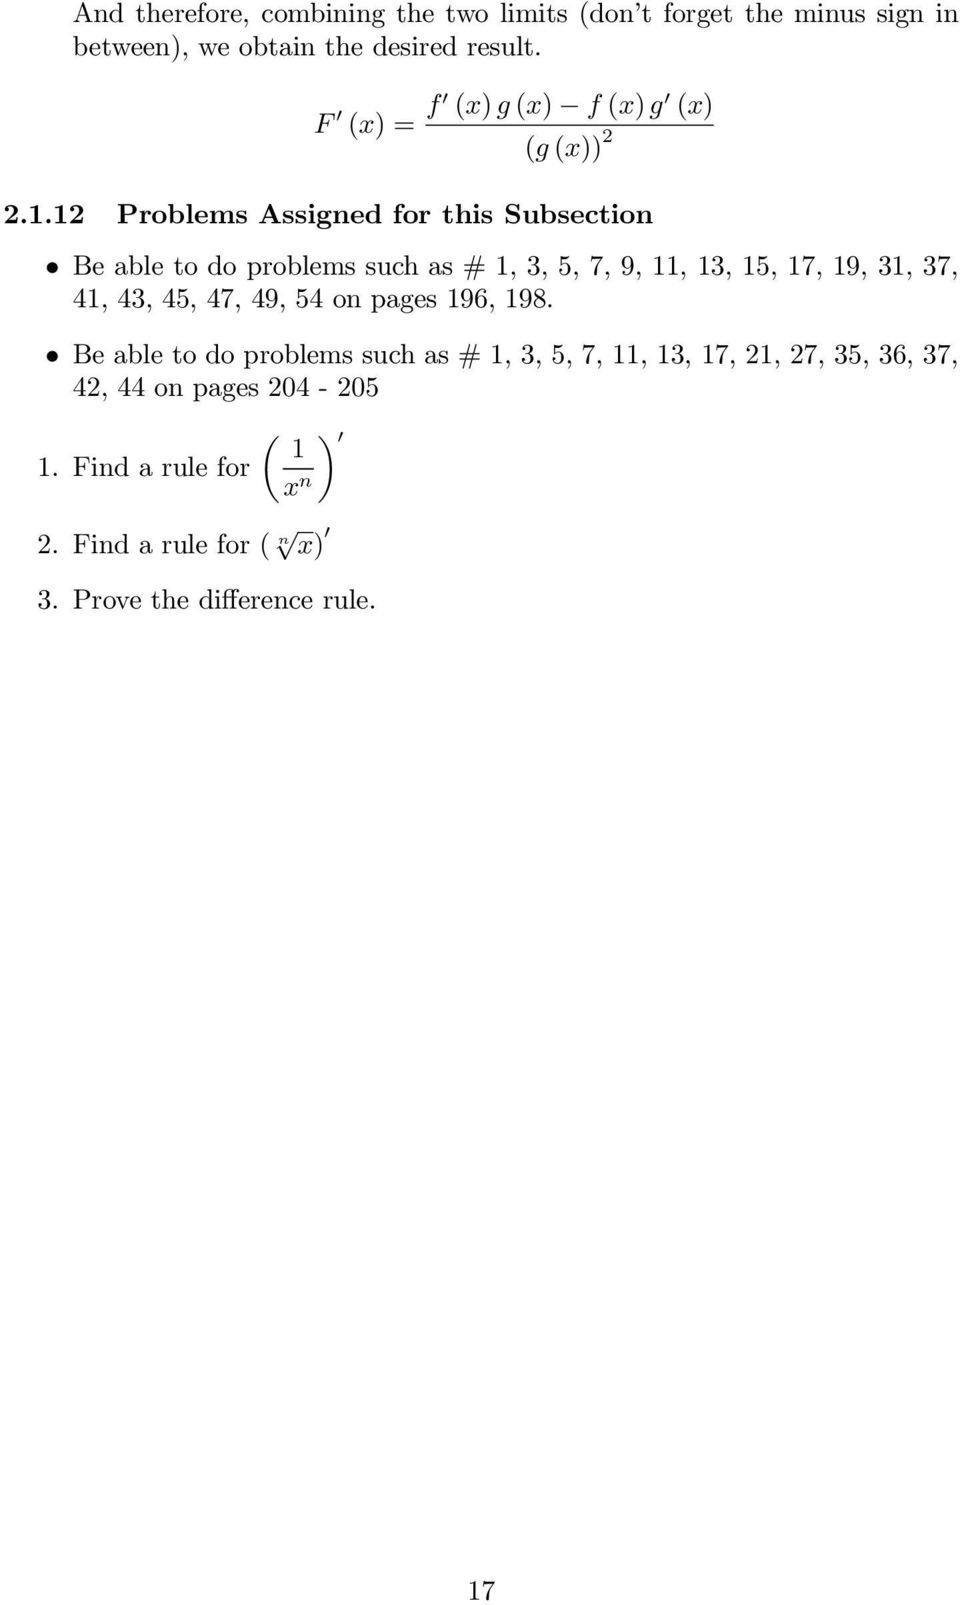 1 Problems Assigned for this Subsection Beabletodoproblemssuchas#1,3,5,7,9,11,13,15,17,19,31,37, 41, 43, 45, 47,